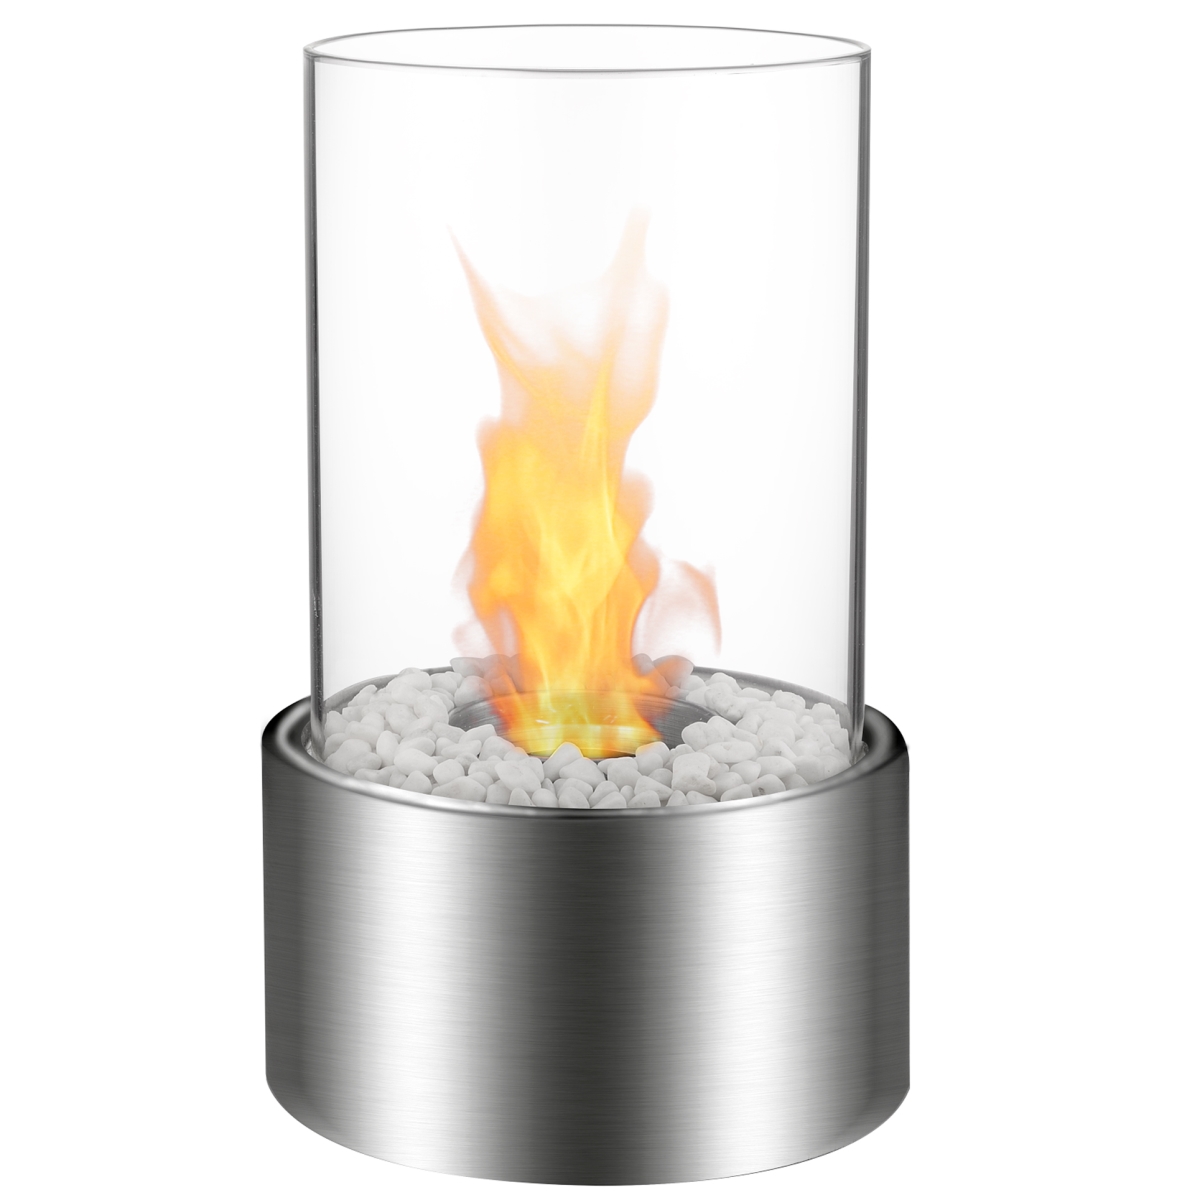 ET7001SS-MF Eden Ventless Tabletop Portable Bio Ethanol Fireplace in Stainless Steel -  Moda Flame